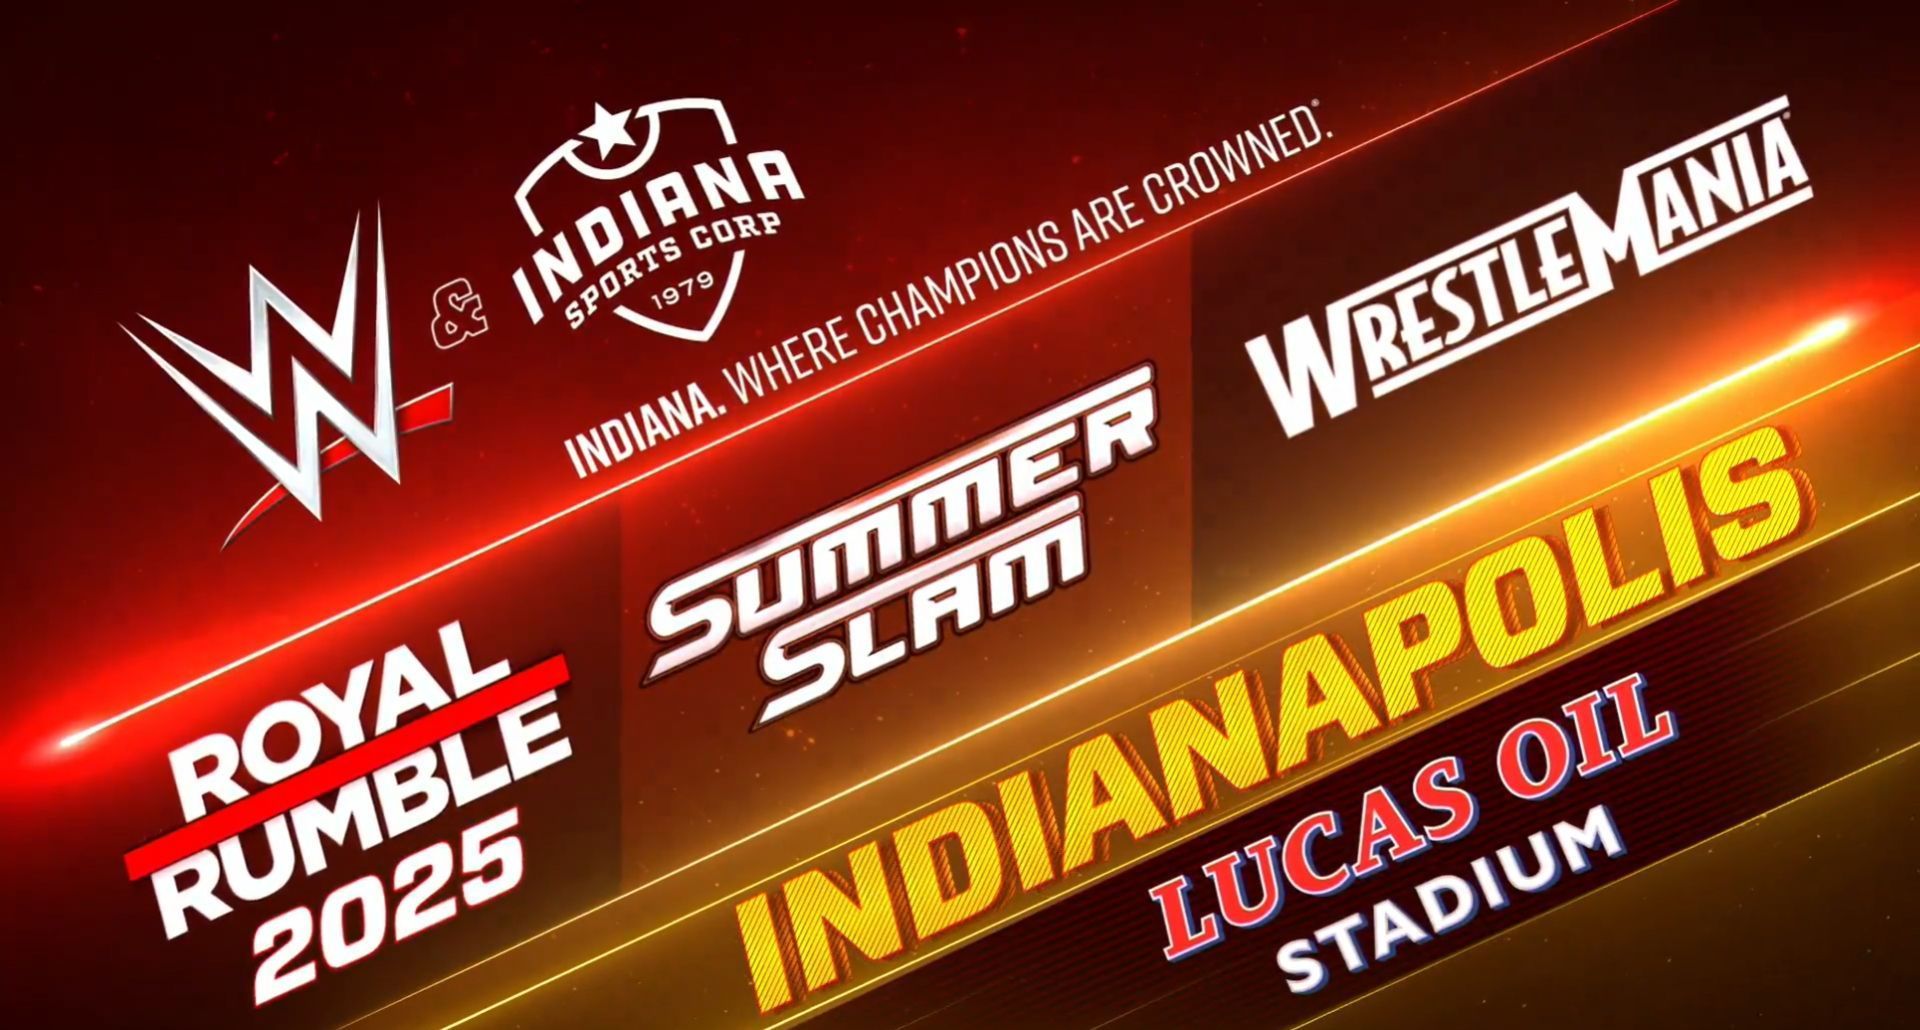 When will WrestleMania and SummerSlam take place in Indianapolis? (credit: Triple H on X)